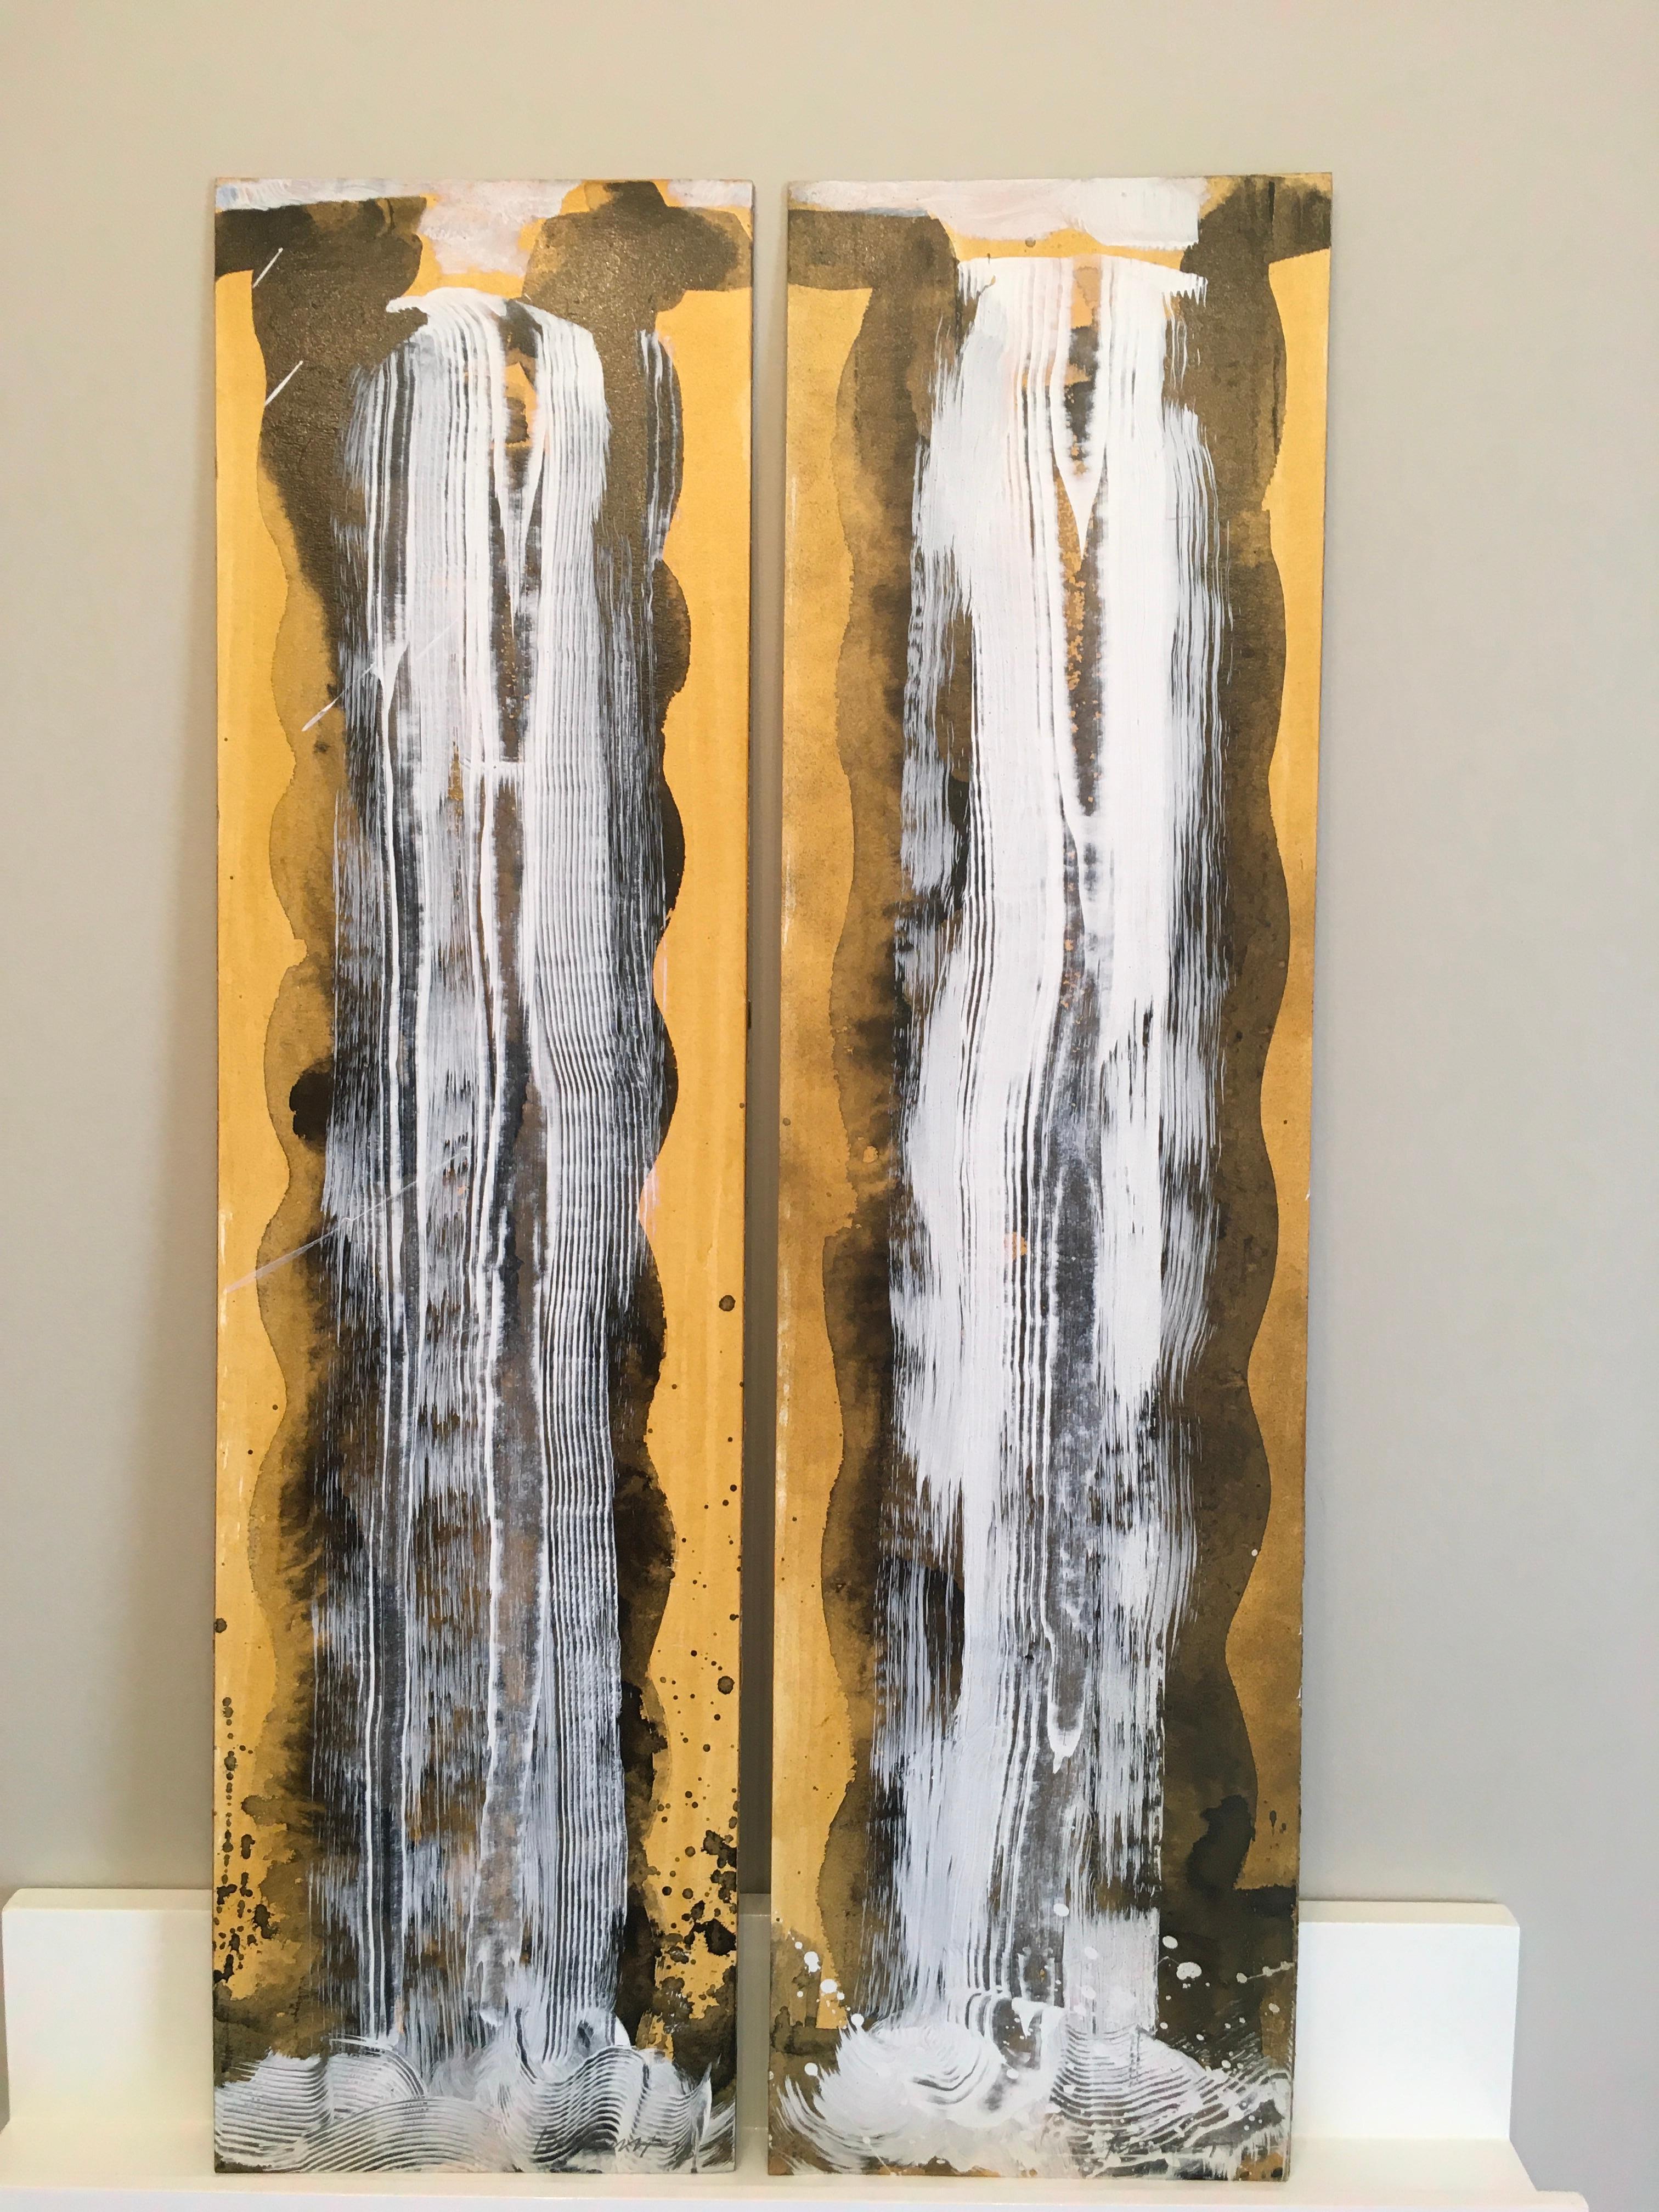 Waterfall Duet 1, Water, Gold, White, Flowing, Acrylic, Oil, Painting, unframed - Black Landscape Painting by Carol Bennett